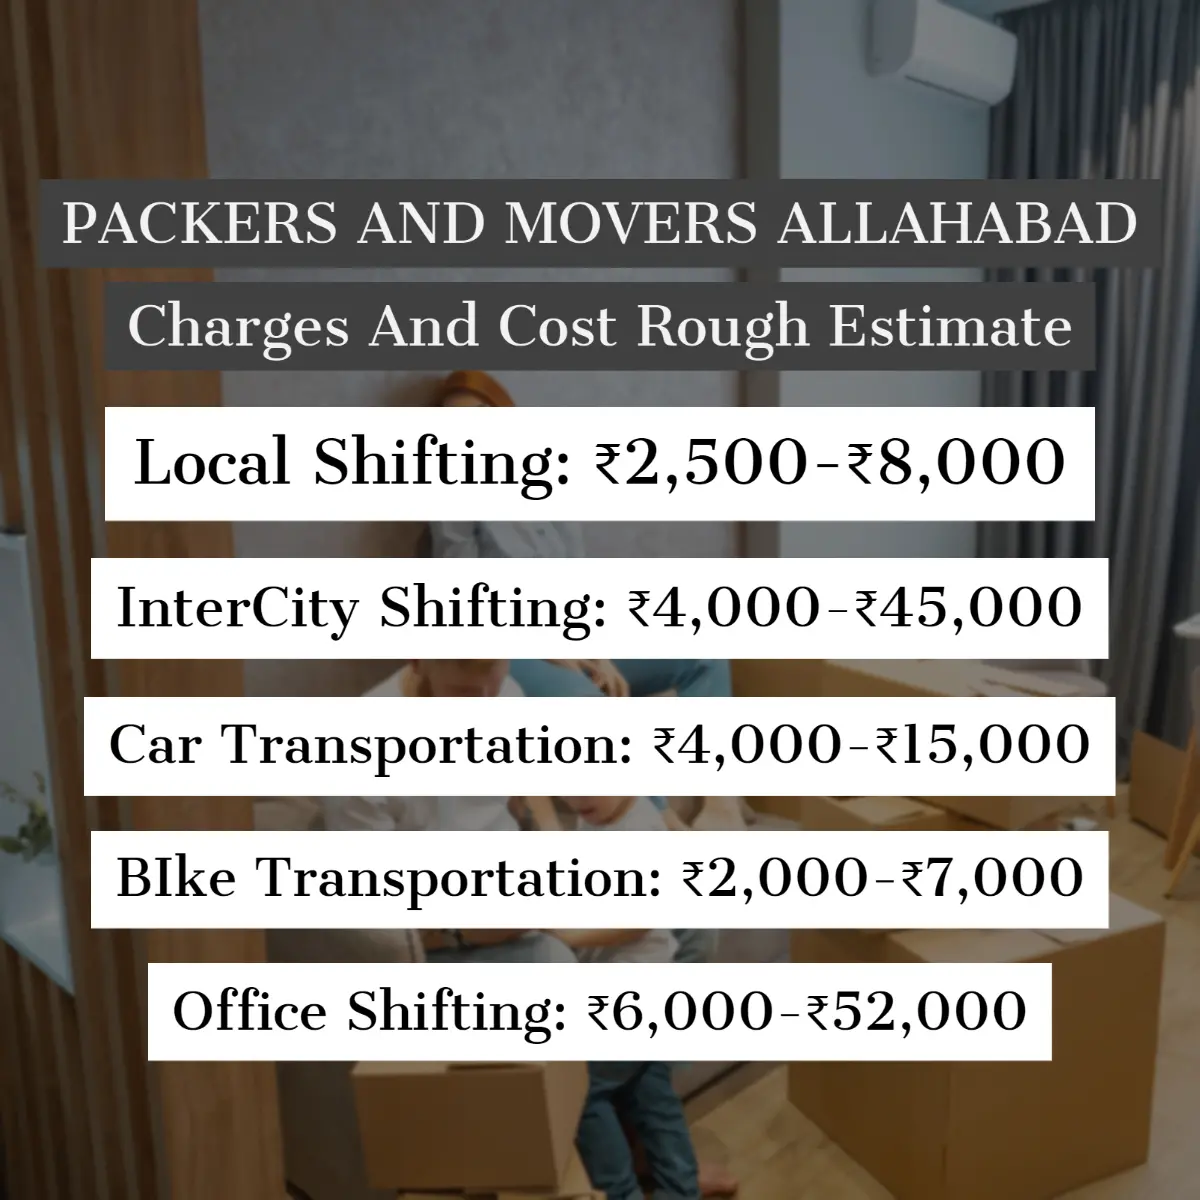 Packers and Movers Allahabad Charges